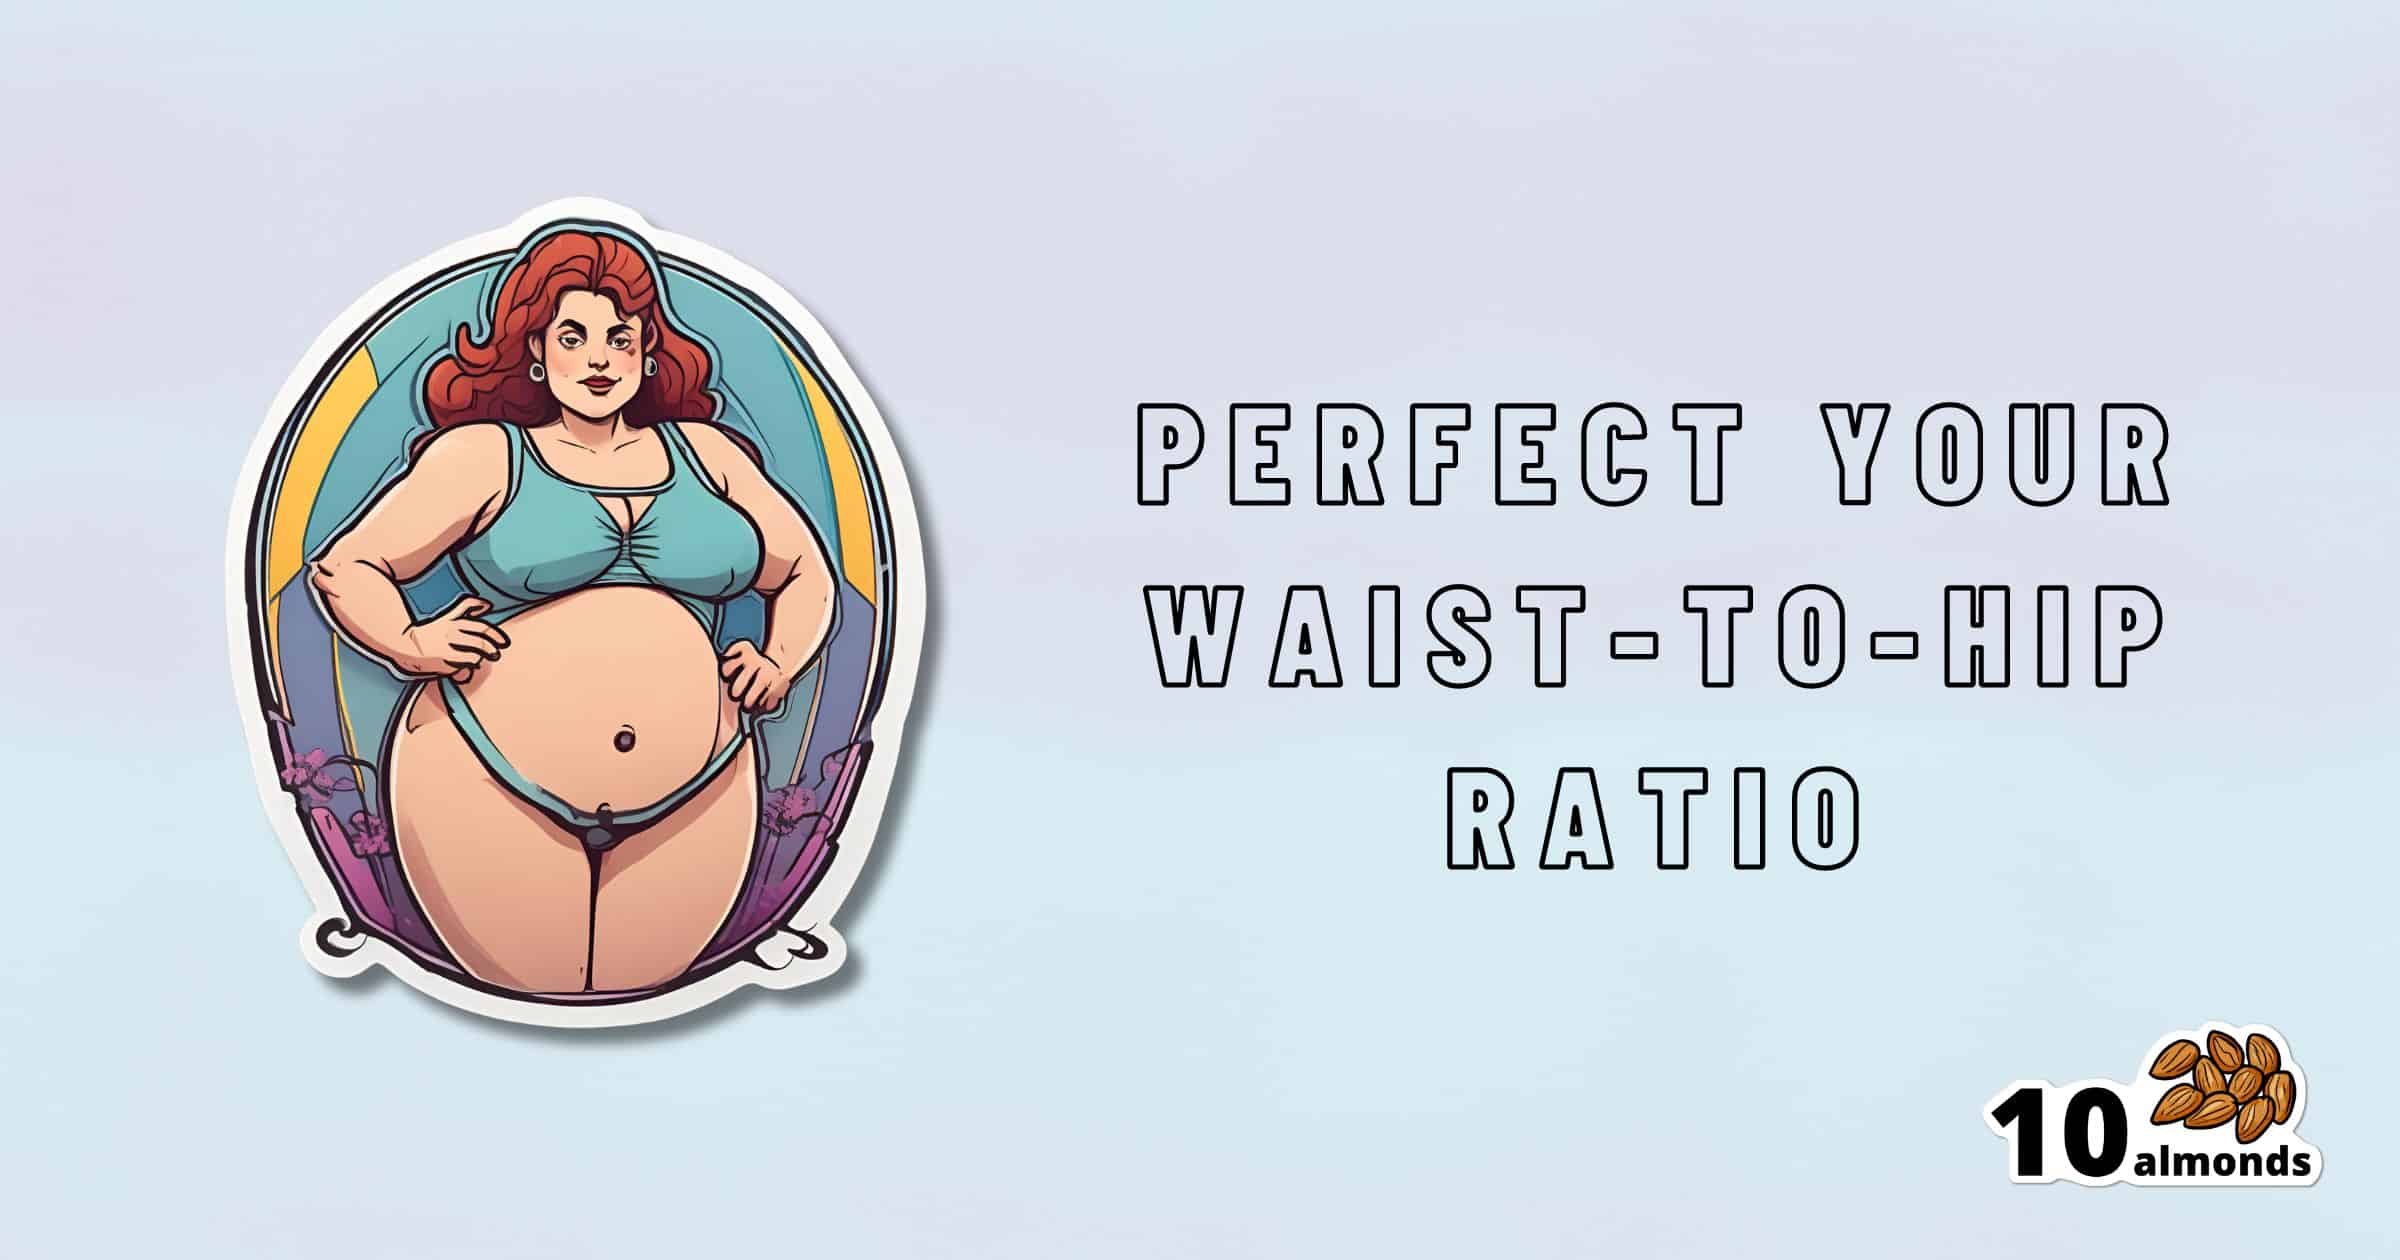 A cartoon drawing of a woman with red hair in green underwear and a blue bra is accompanied by the text "Easy Ways to Perfect Your Waist-To-Hip Ratio" on the right. A logo in the bottom right corner reads "10 almonds" and displays an image of ten almonds.